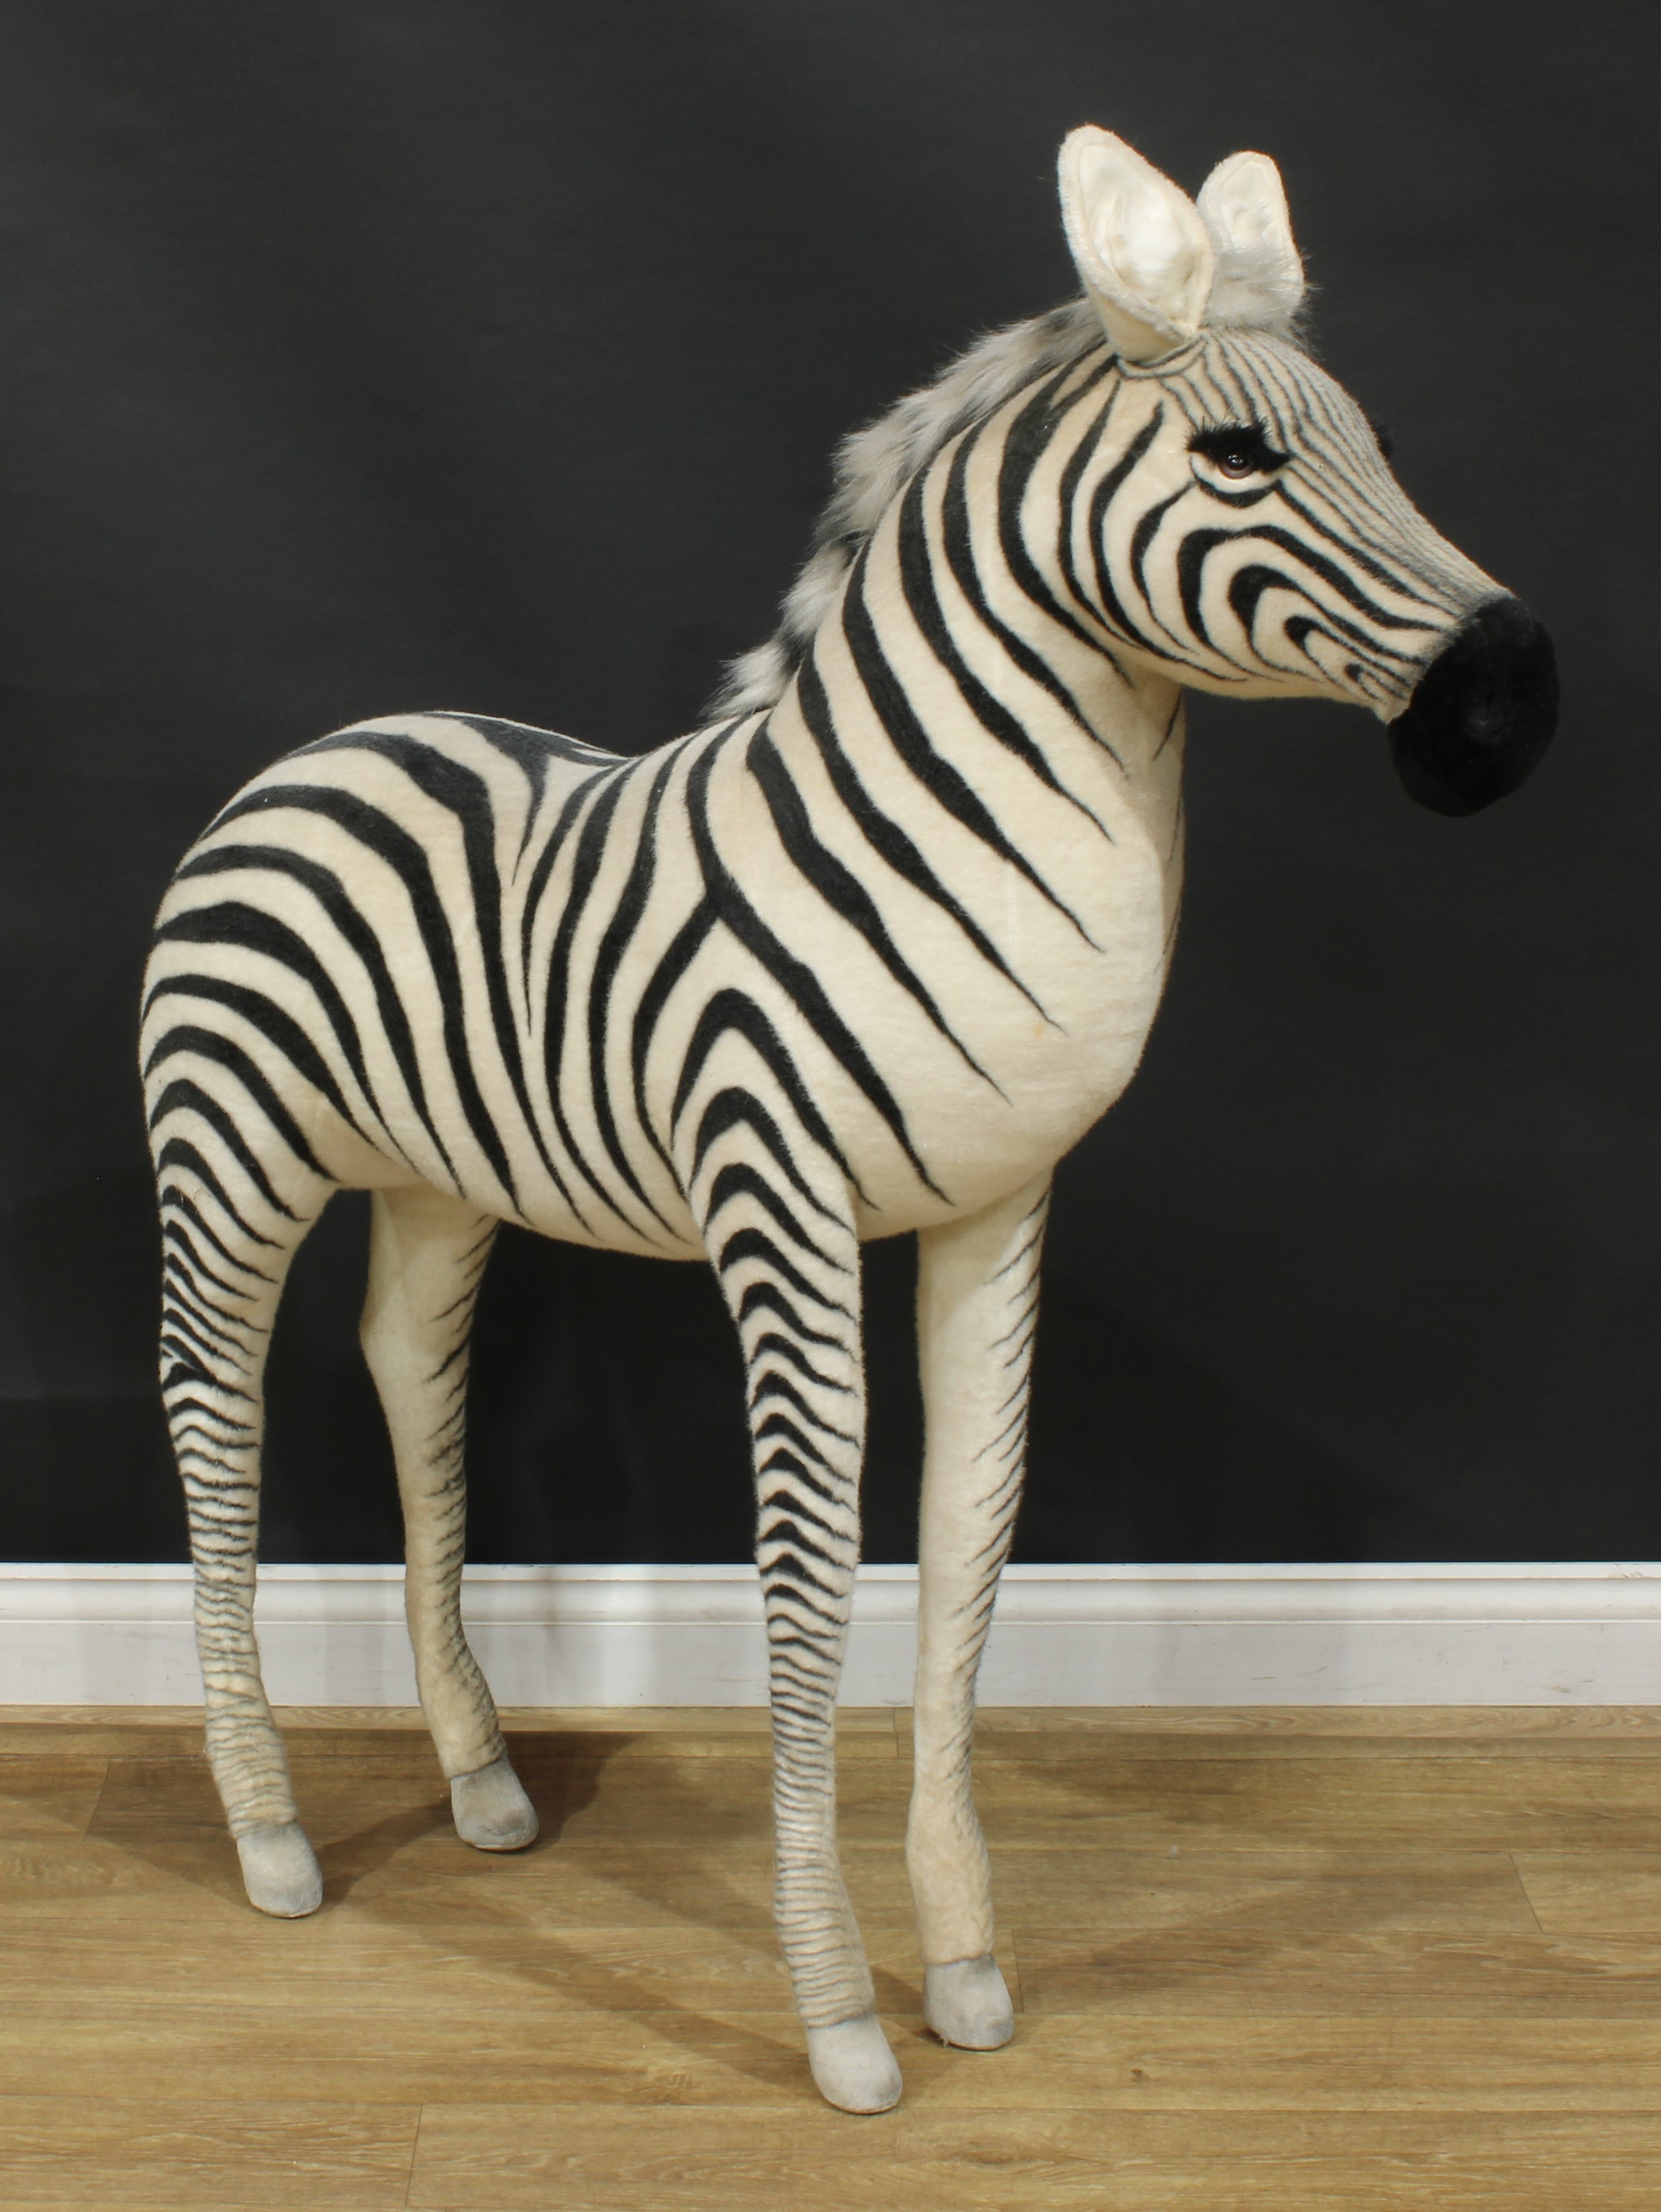 A large shop display/point of sale model of a Zebra, probably by Steiff (Germany) or similar,